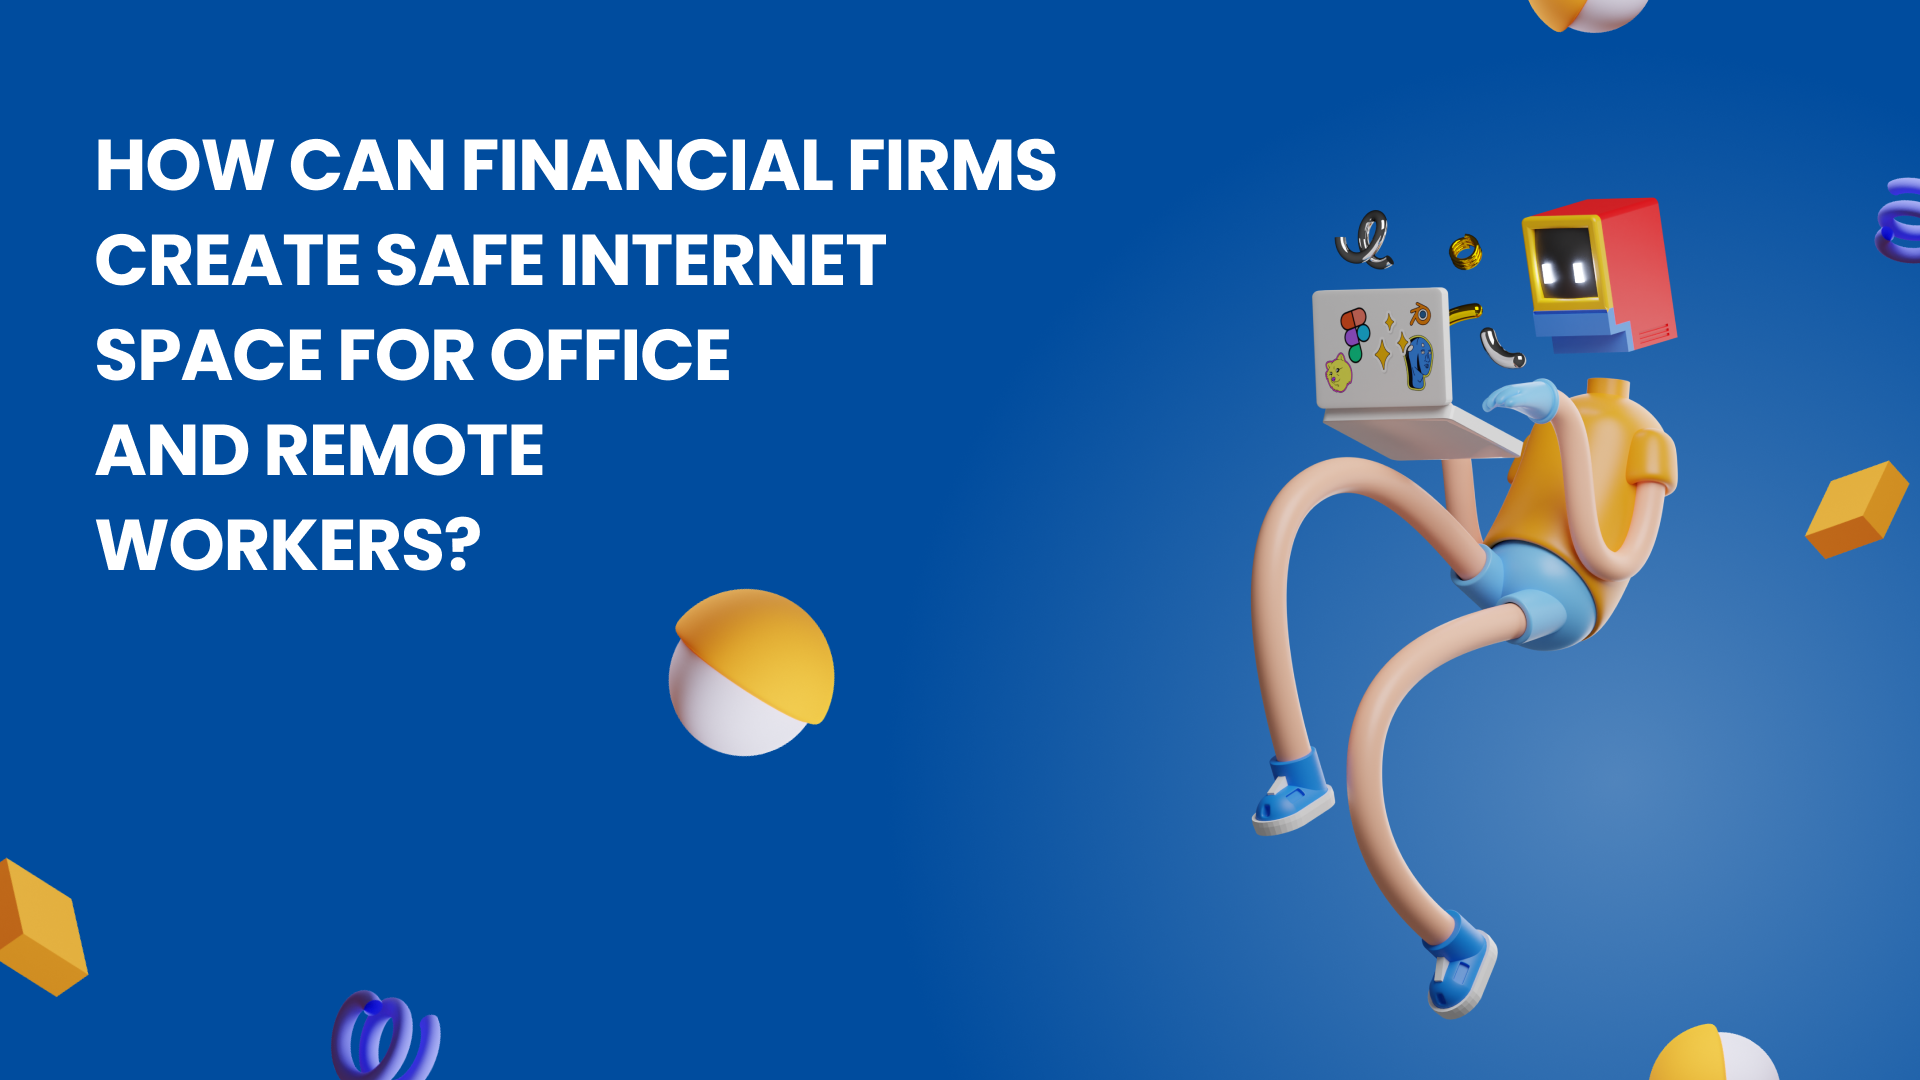 How Can Financial Firms Create Safe Internet Space for Office and Remote Workers?